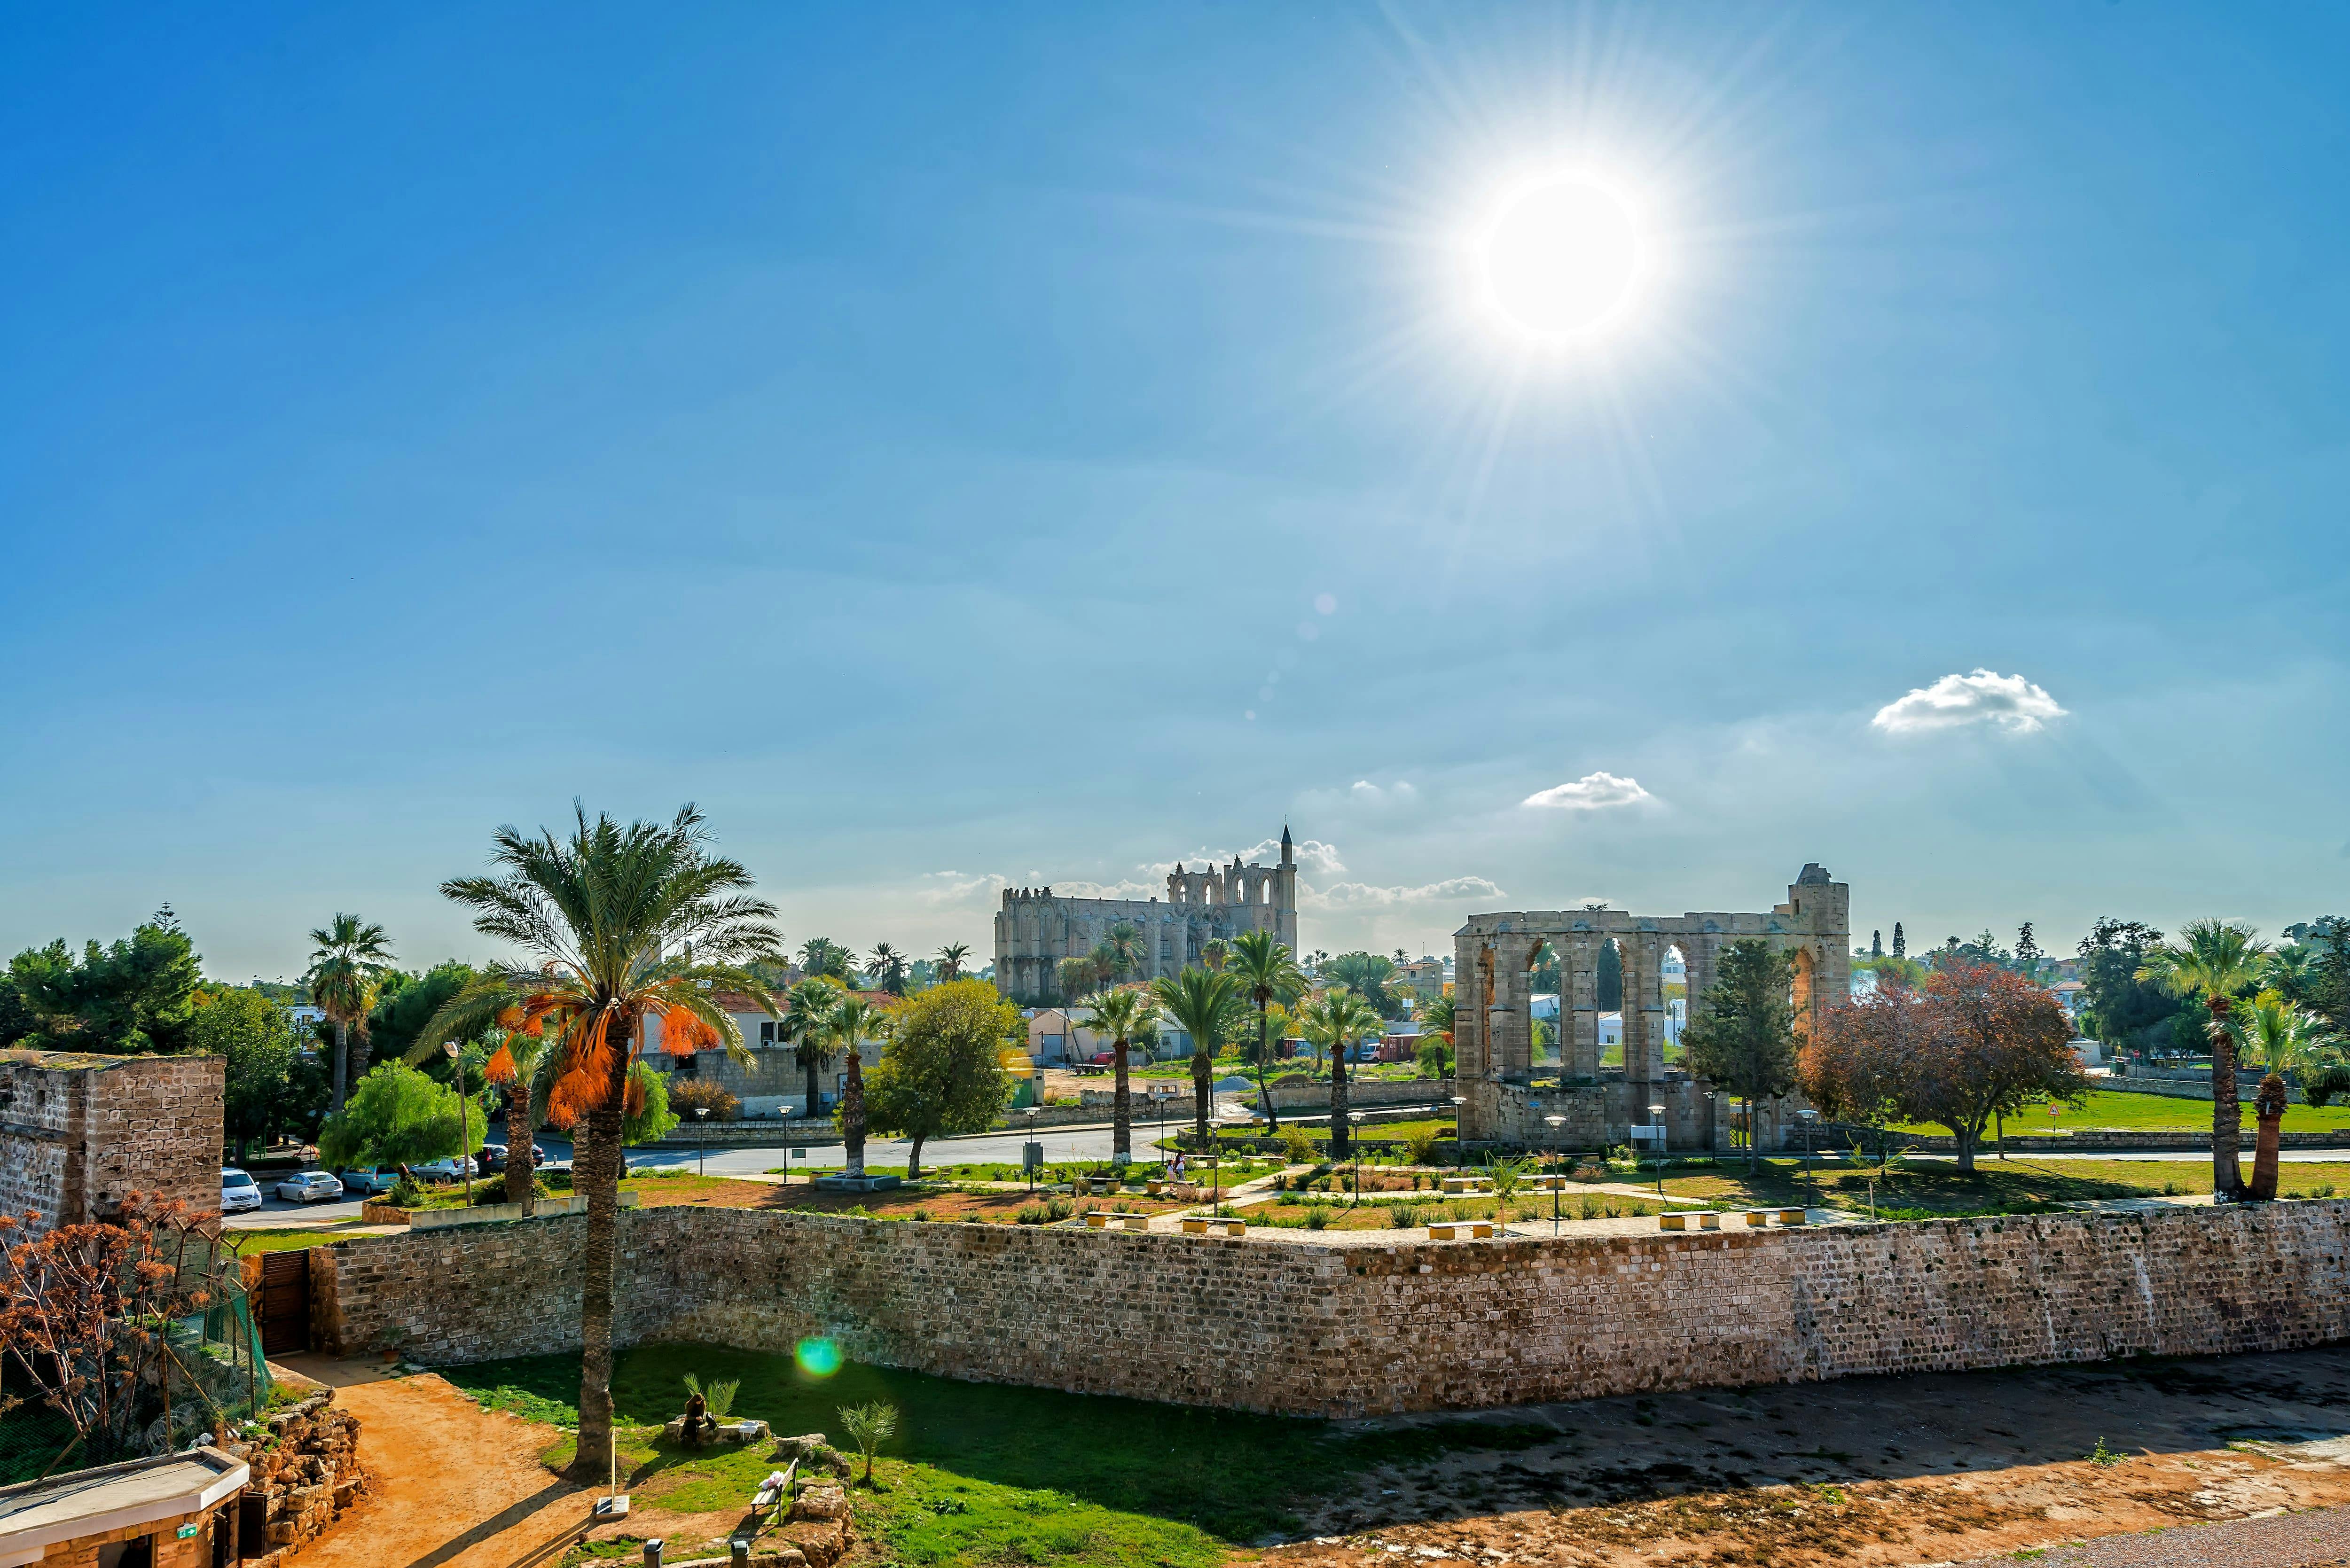 Northern Cyprus Discovery Tour